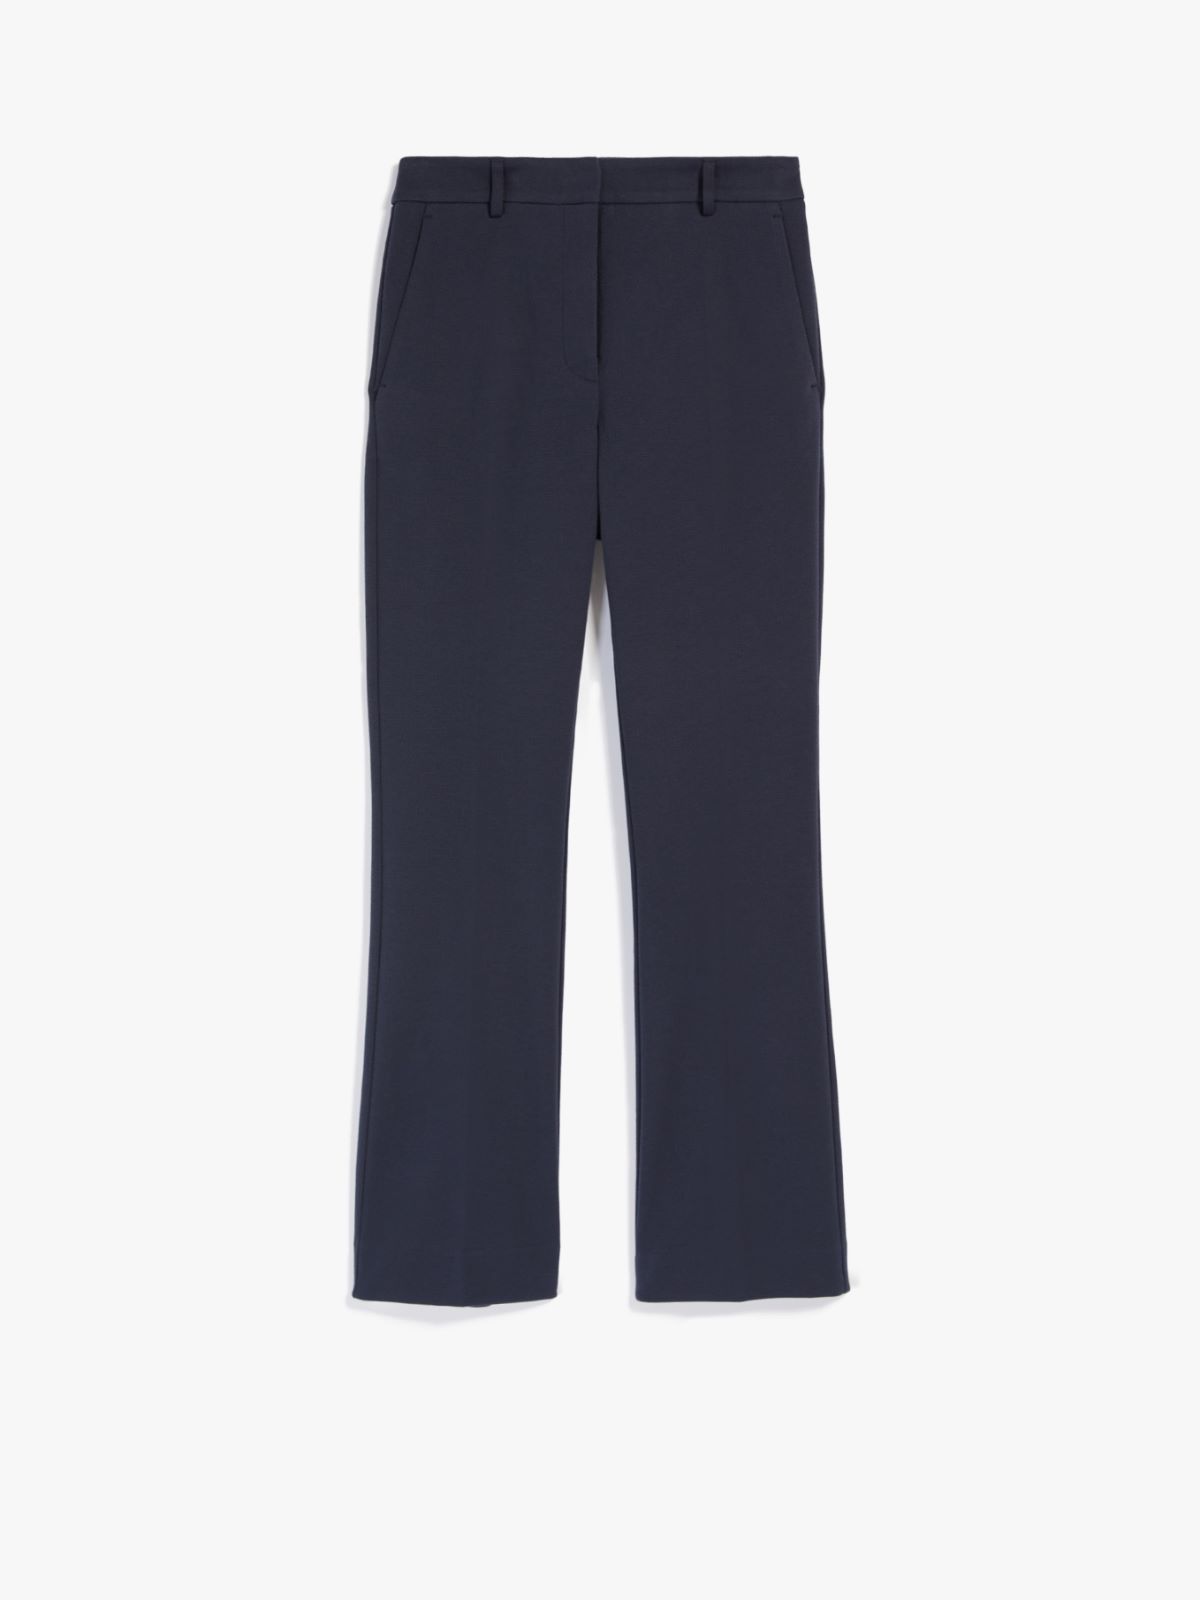 Jersey trousers - NAVY - Weekend Max Mara - 5